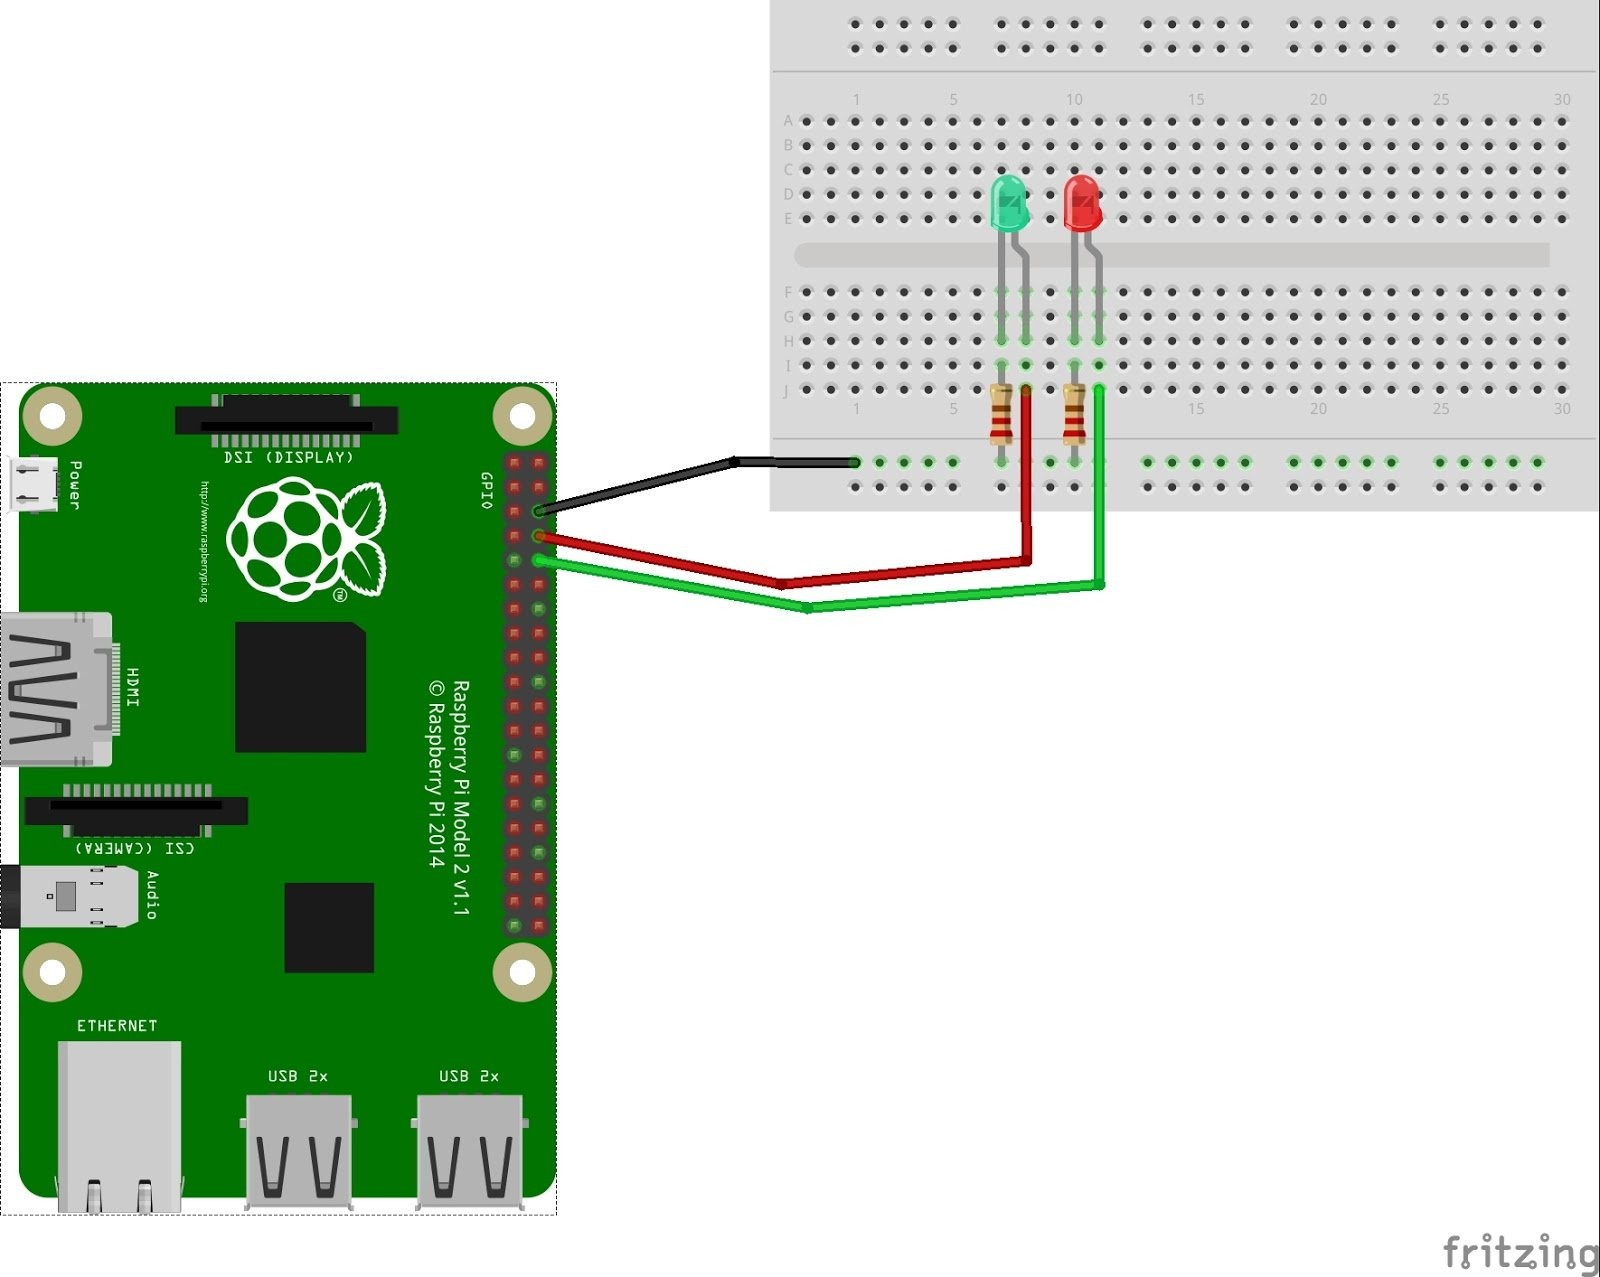 Raspberry Pi Wiring Diagram Best How to Glow An Led Using Raspberry Pi and Python